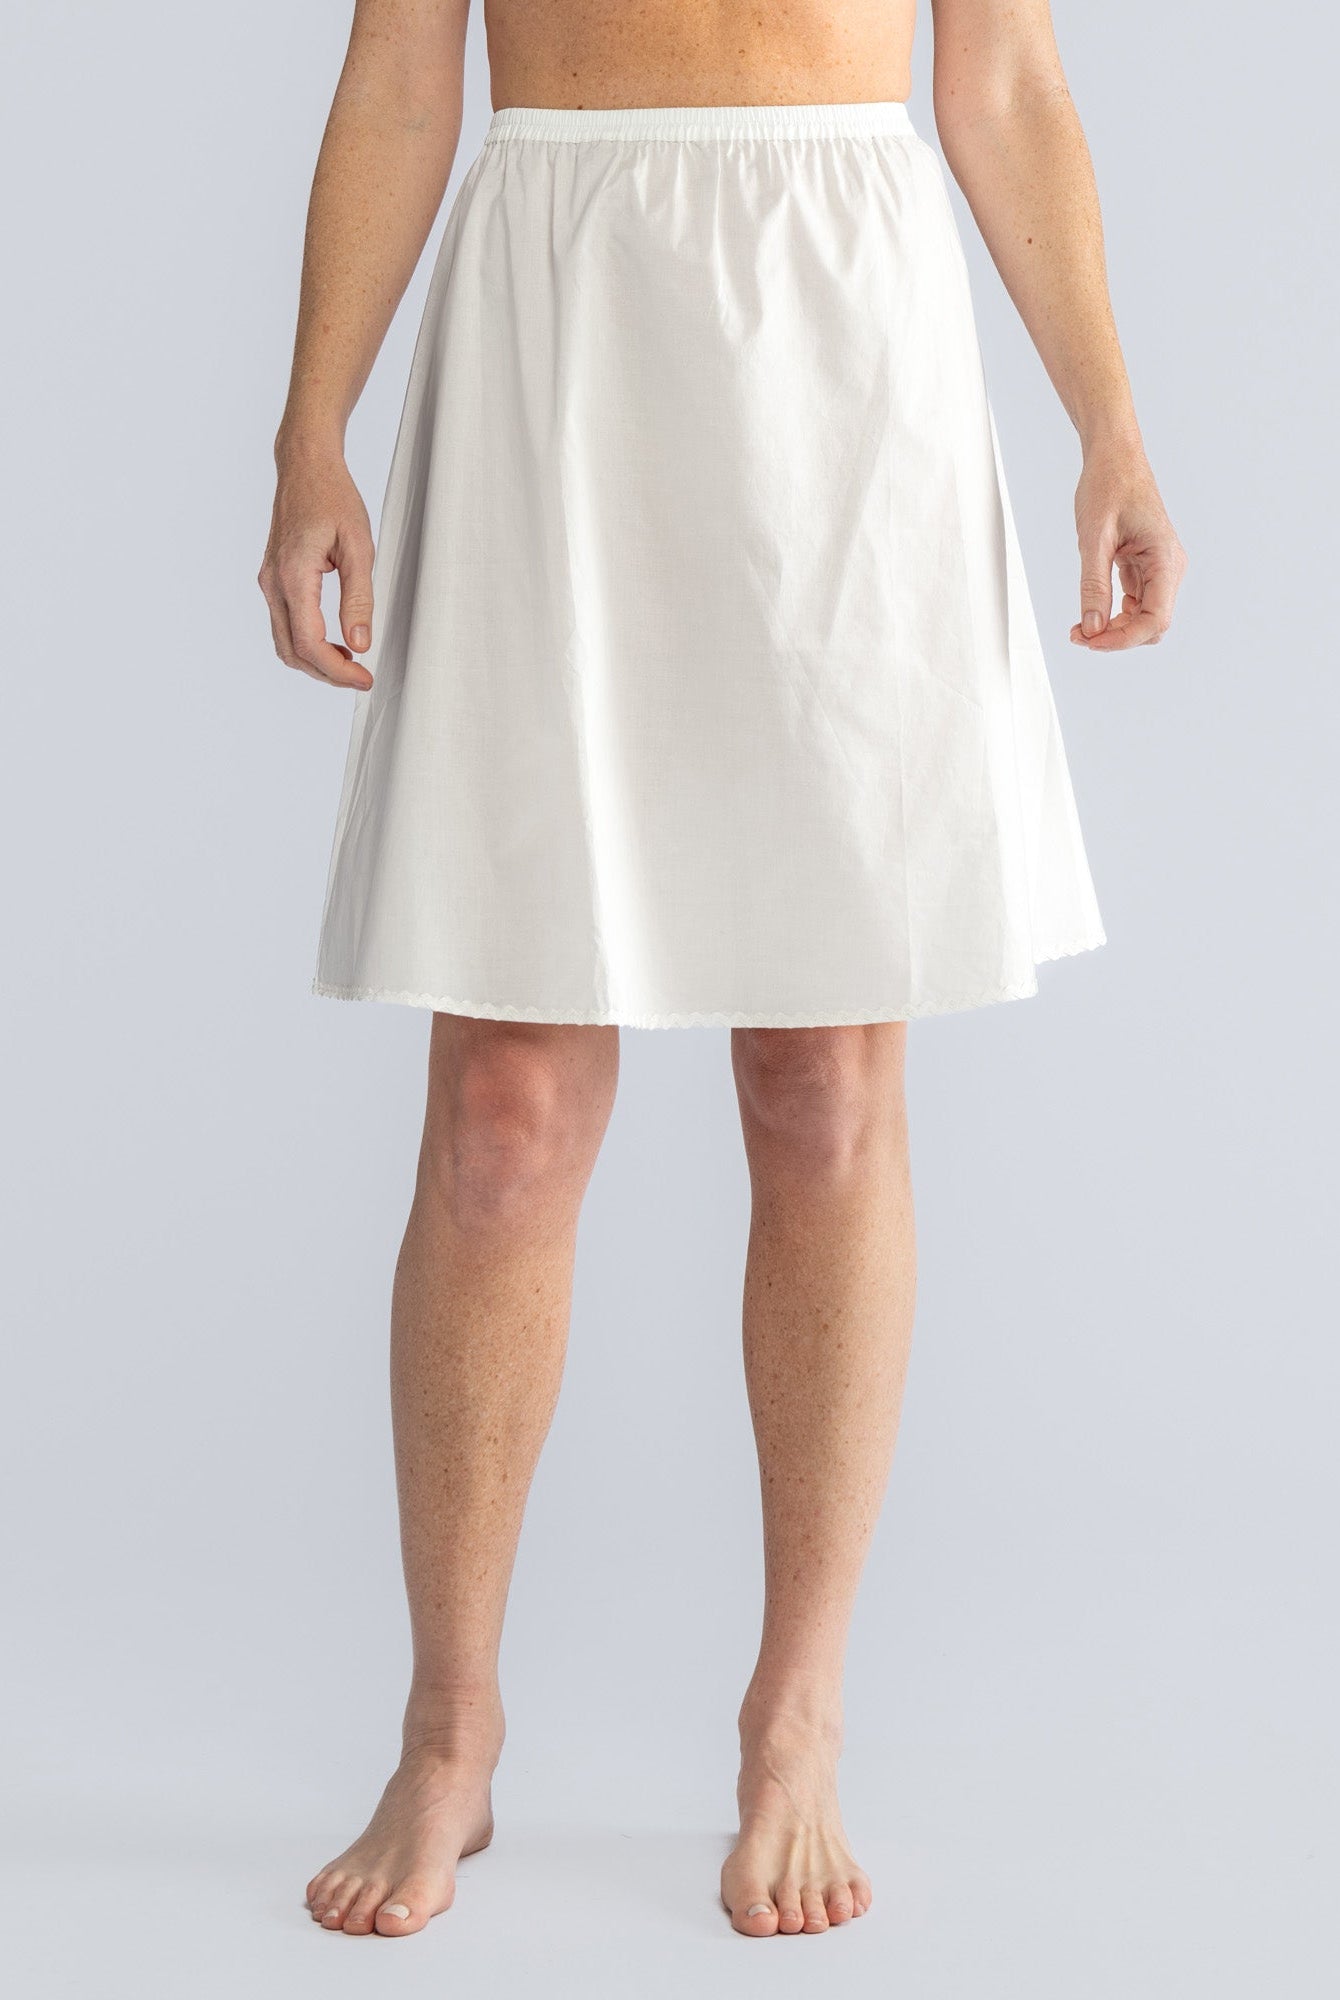 KRYSIA half-slip White Cotton - Lesley Evers-Bottoms-Shop-Shop/All Products